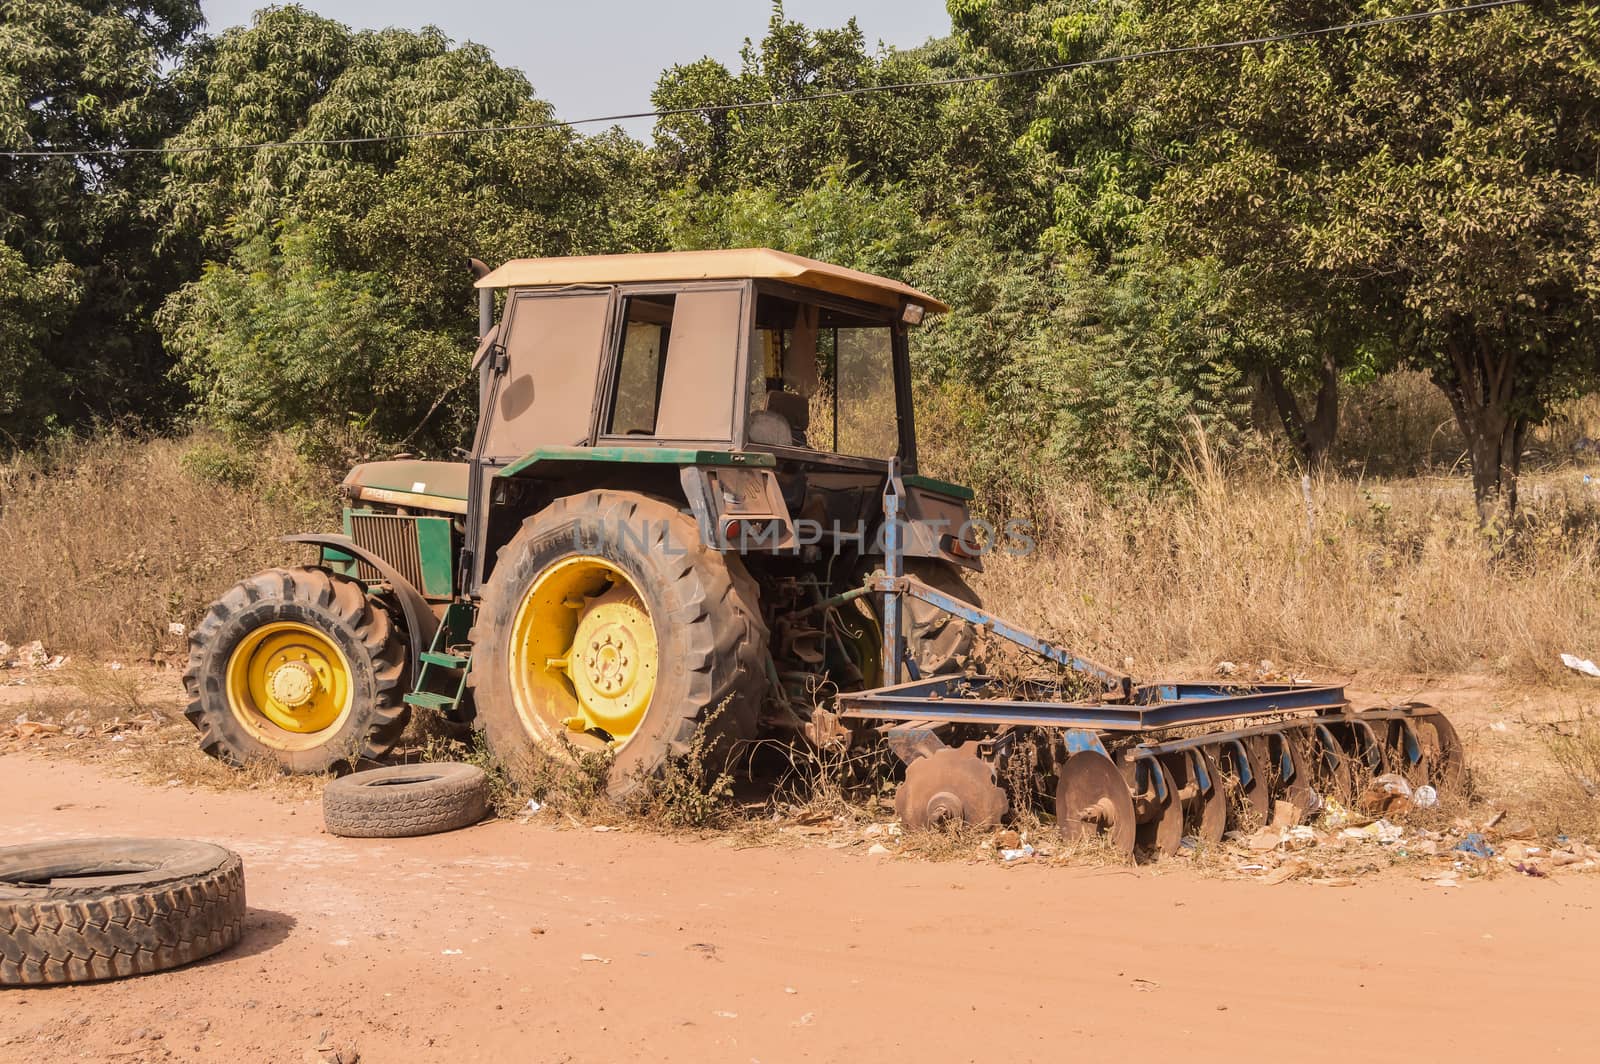 Old rusty abandoned tractor on a dirt road in The Gambia